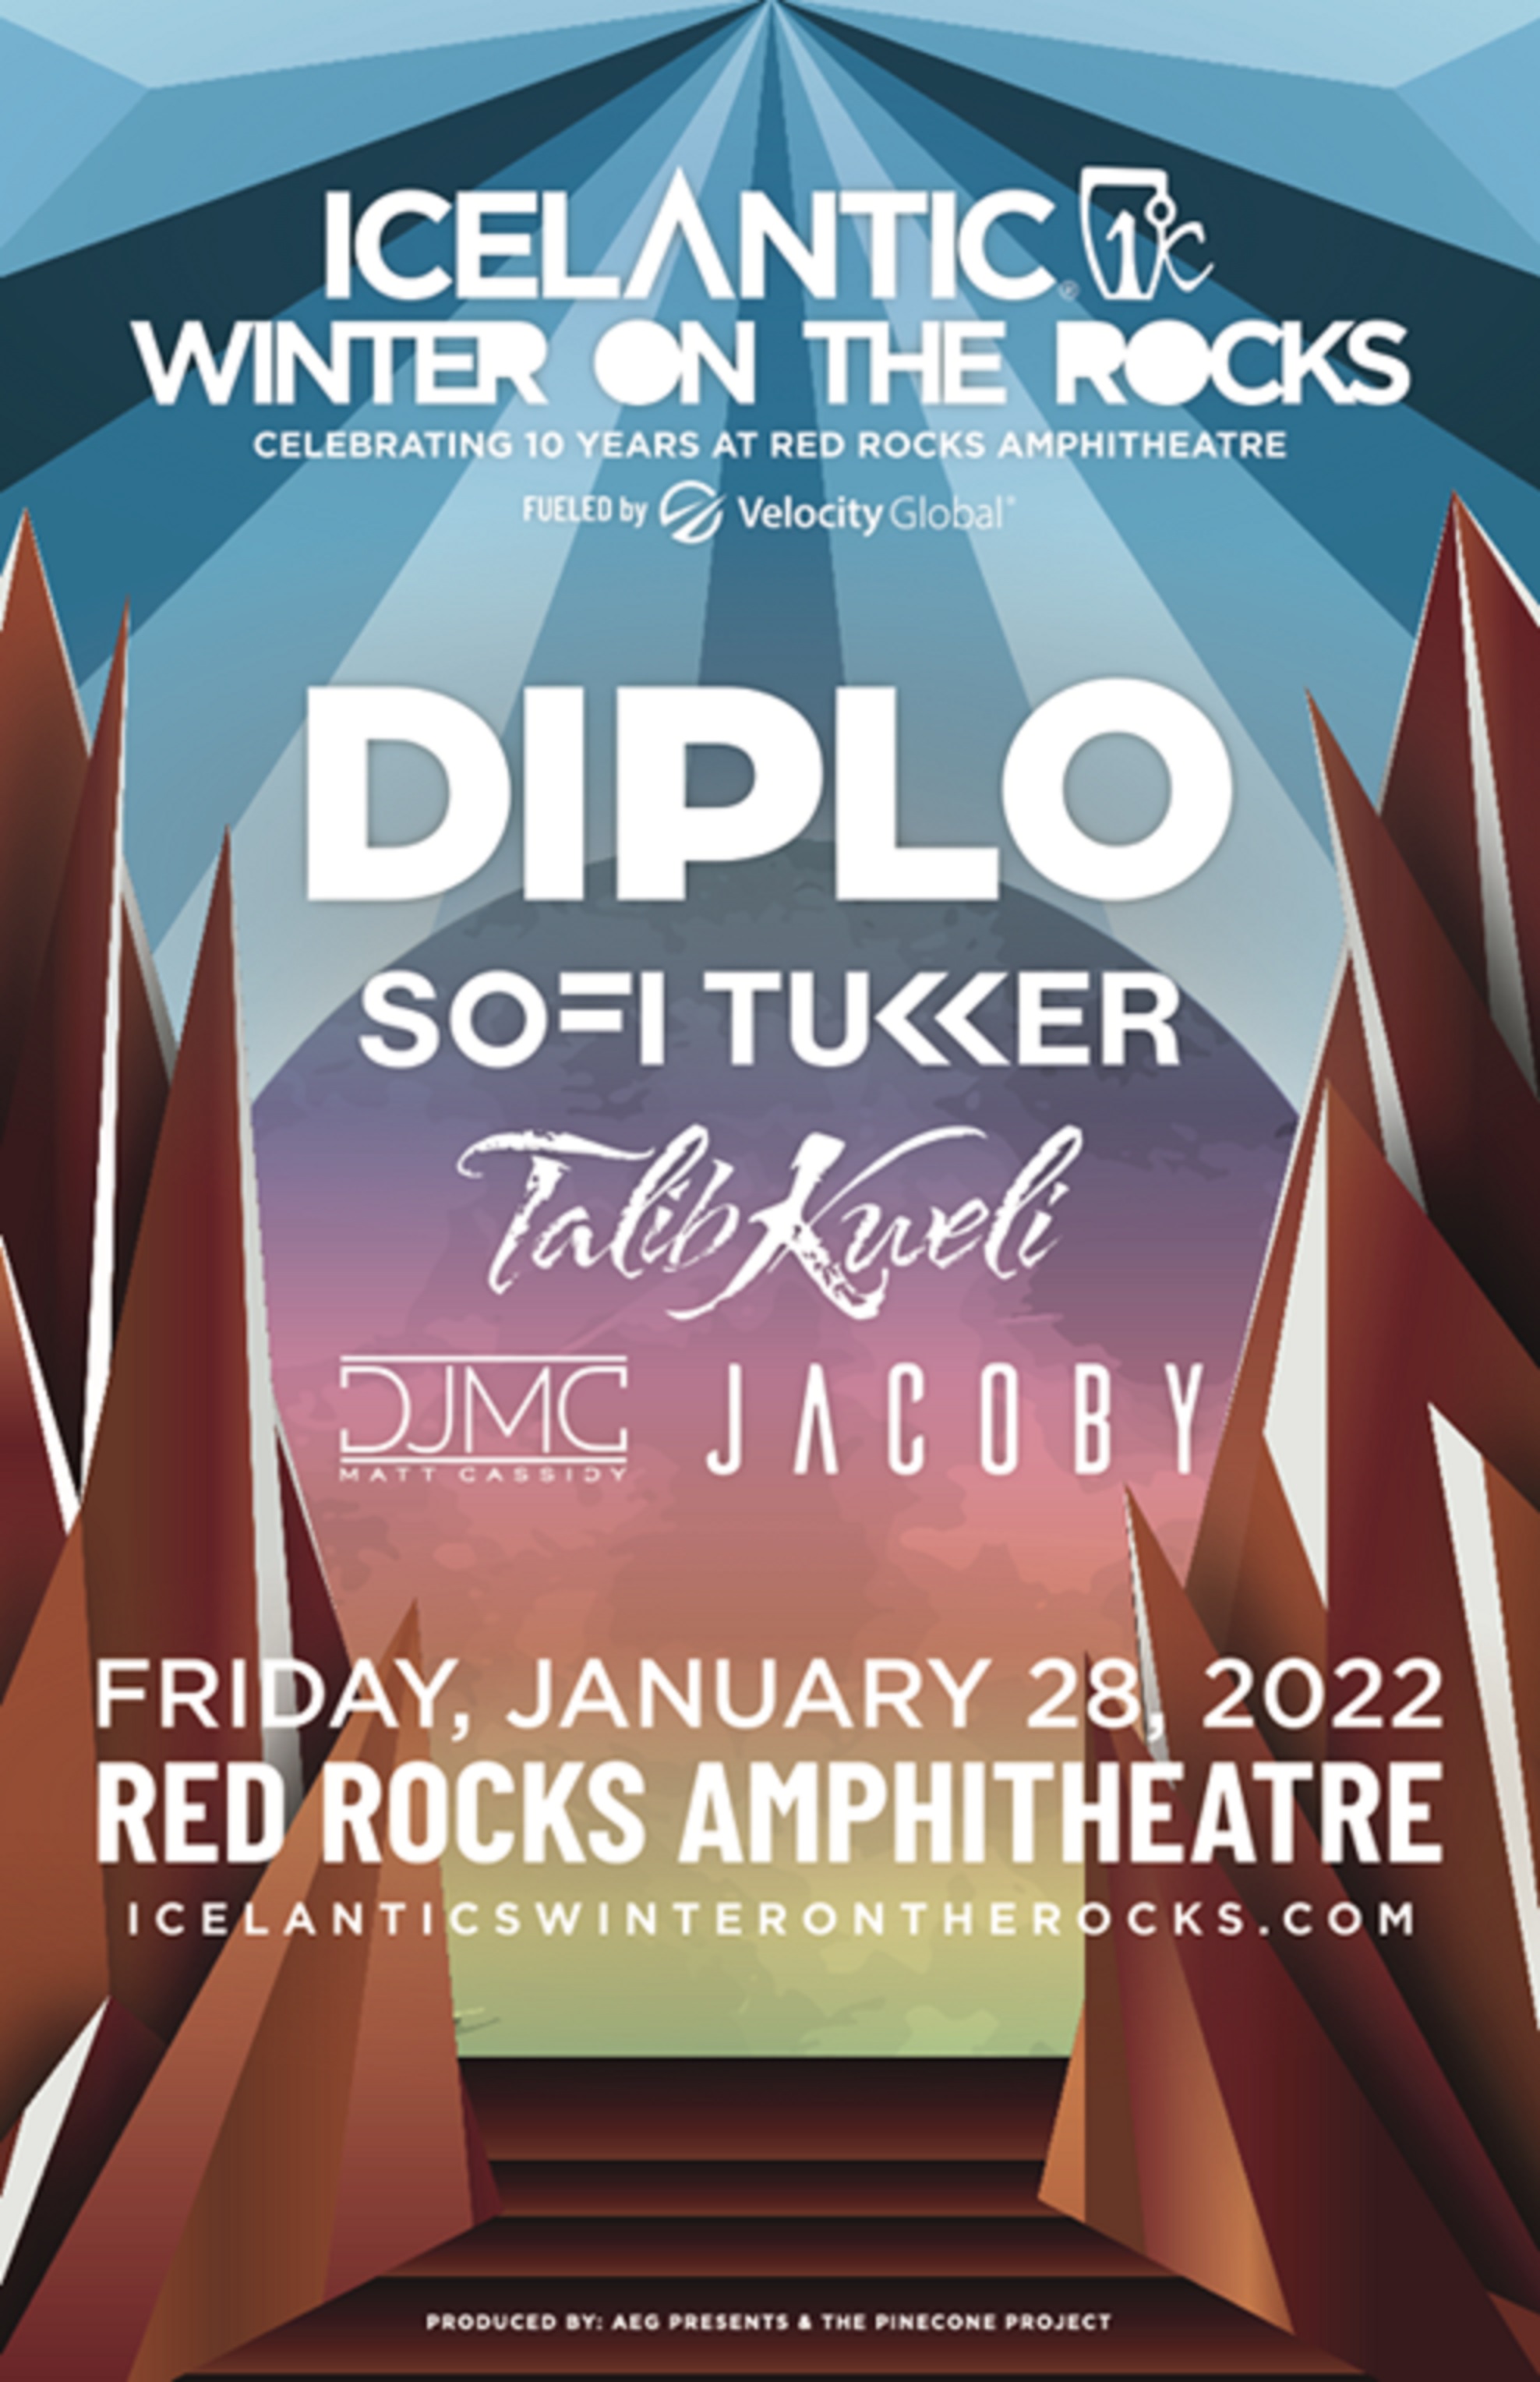 Icelantic’s Winter on the Rocks Gets Ready to Celebrate 10 Years